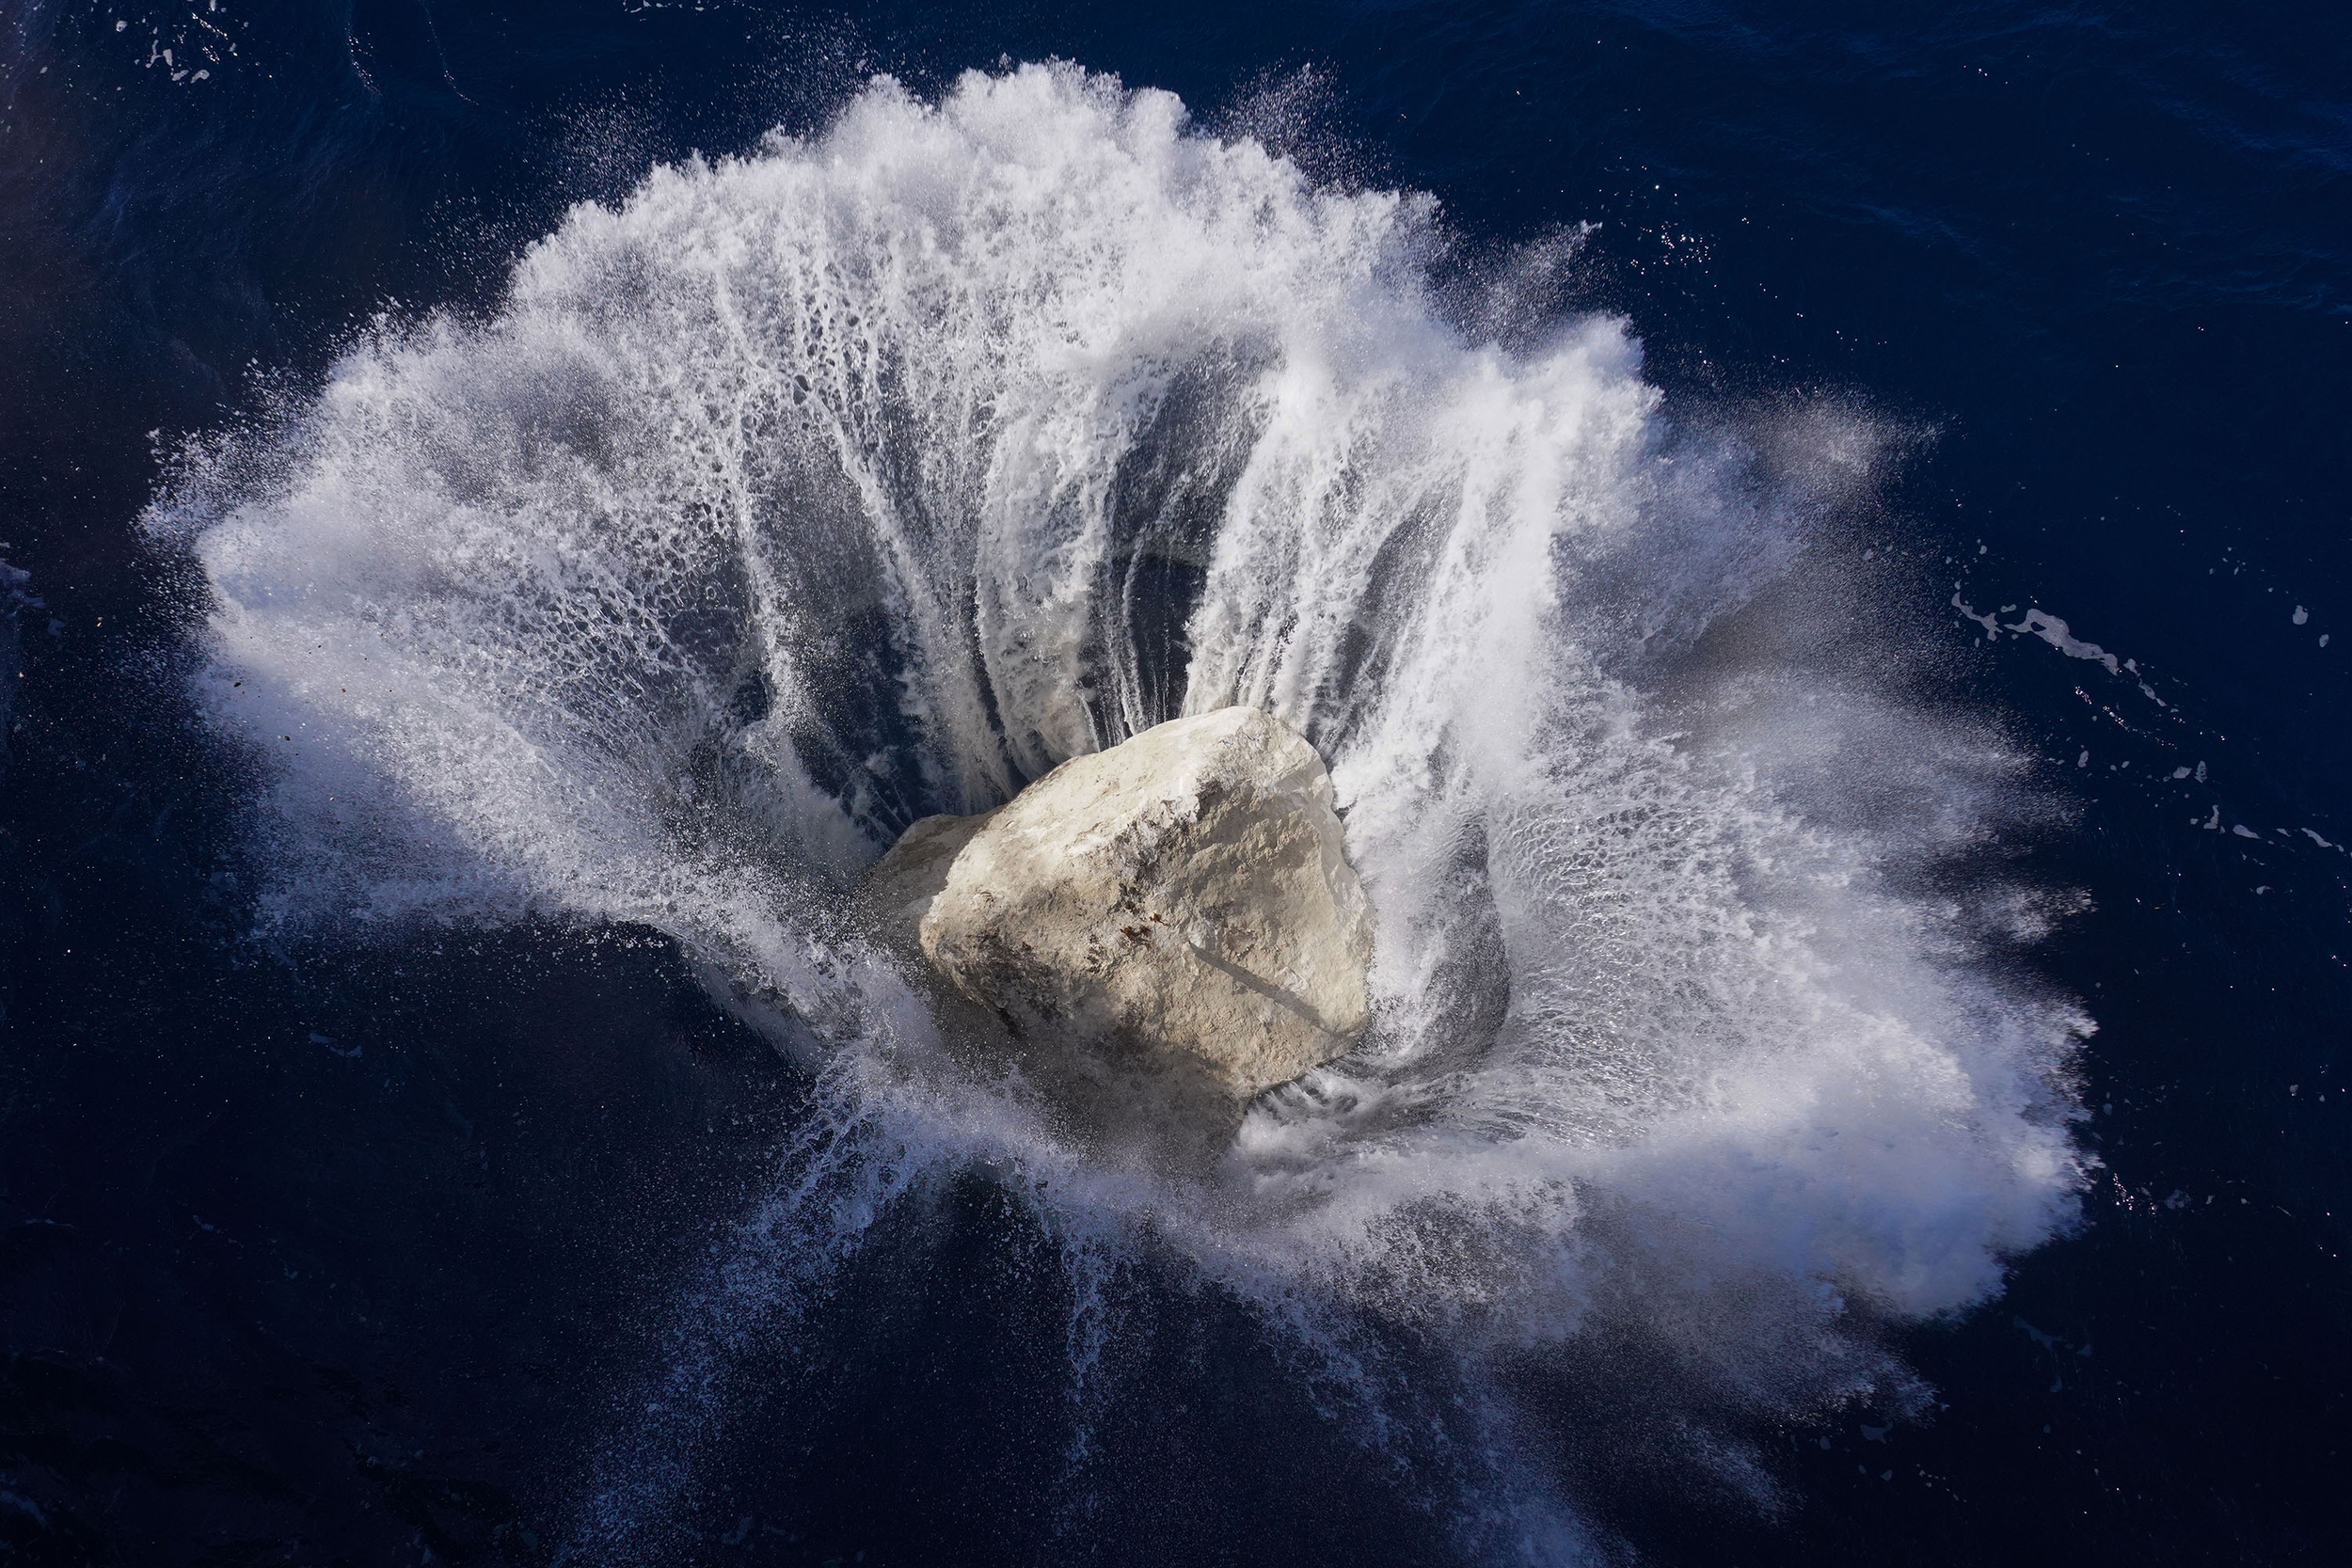 A boulder splashes into the water